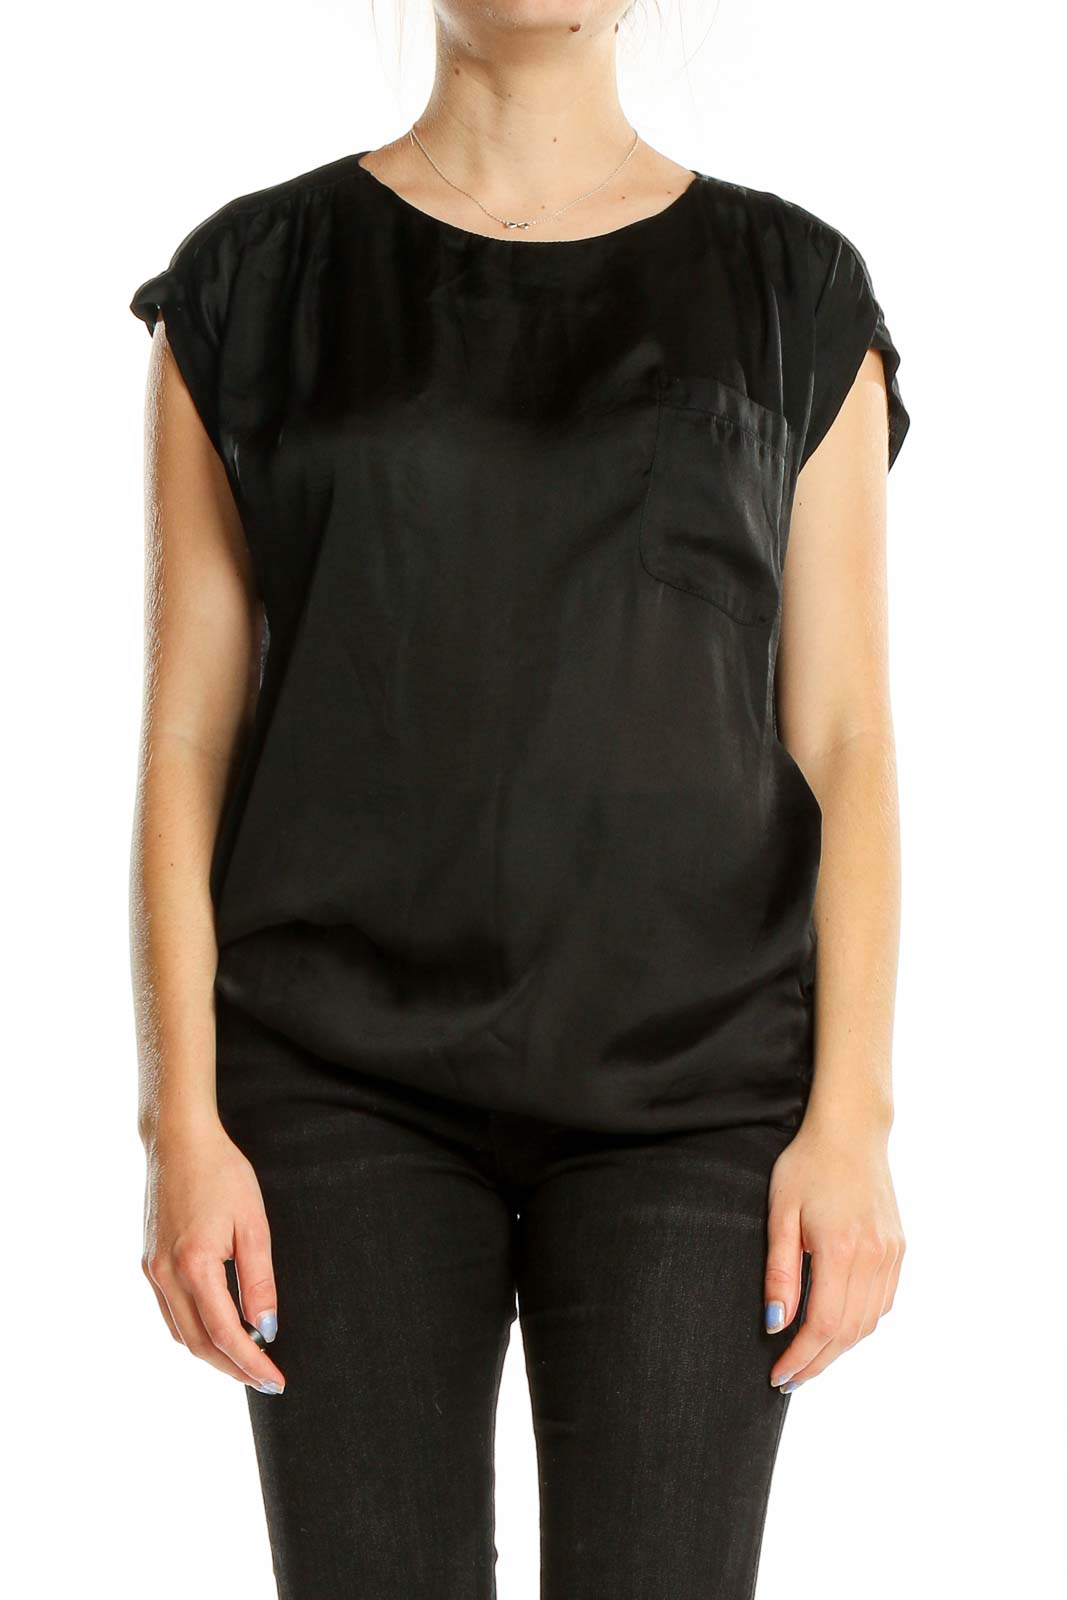 Black Solid Top Front